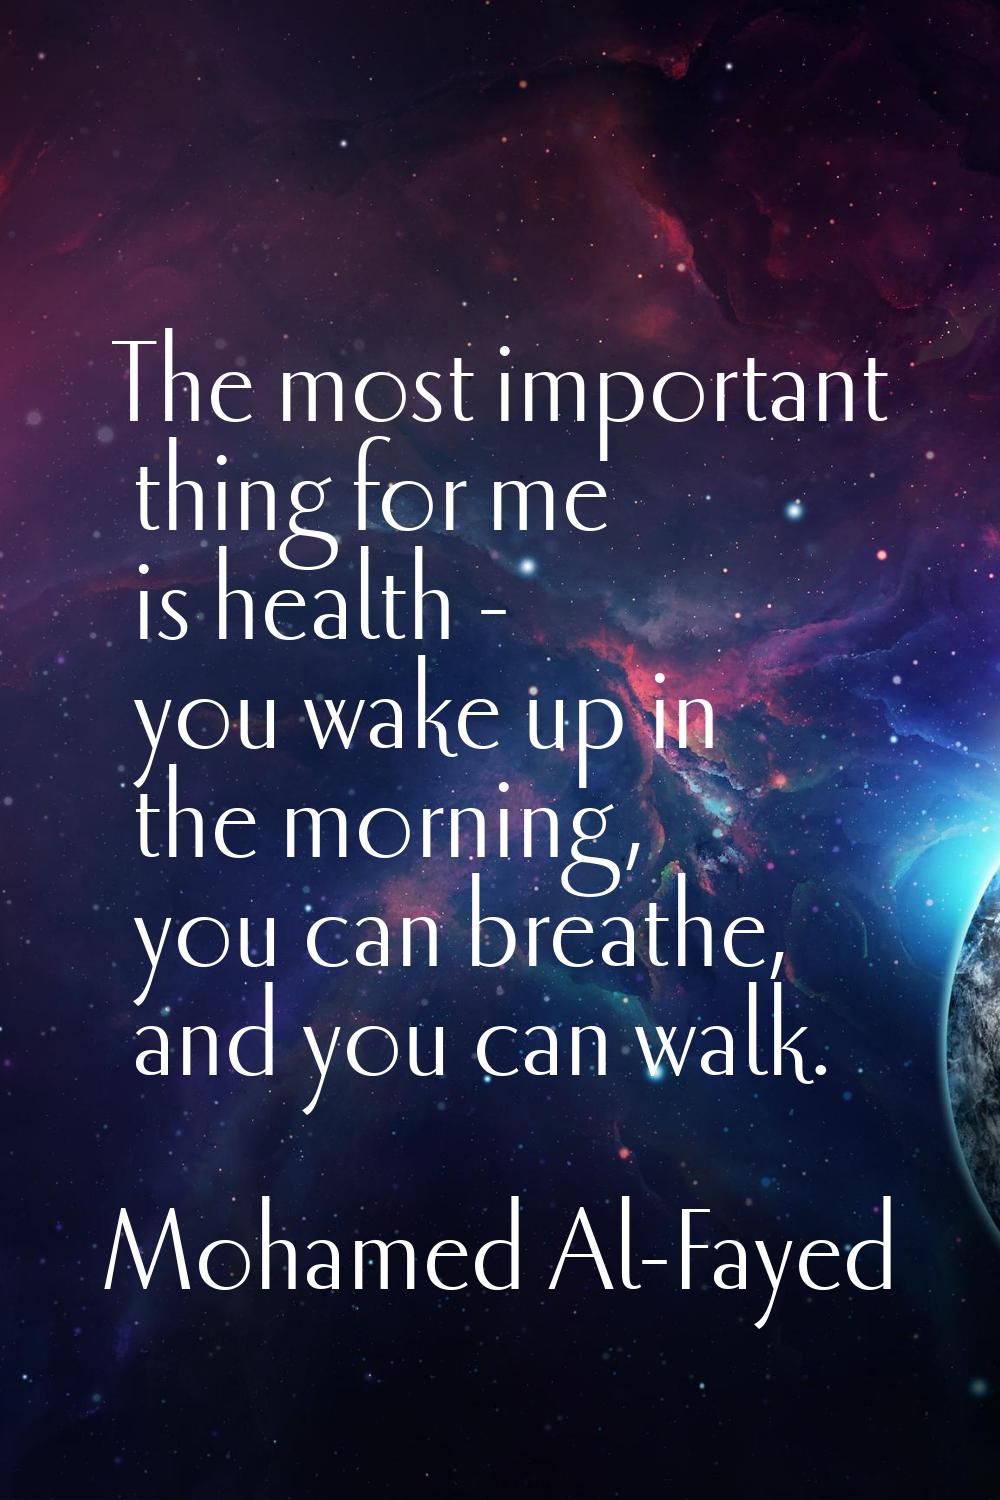 The most important thing for me is health - you wake up in the morning, you can breathe, and you ca